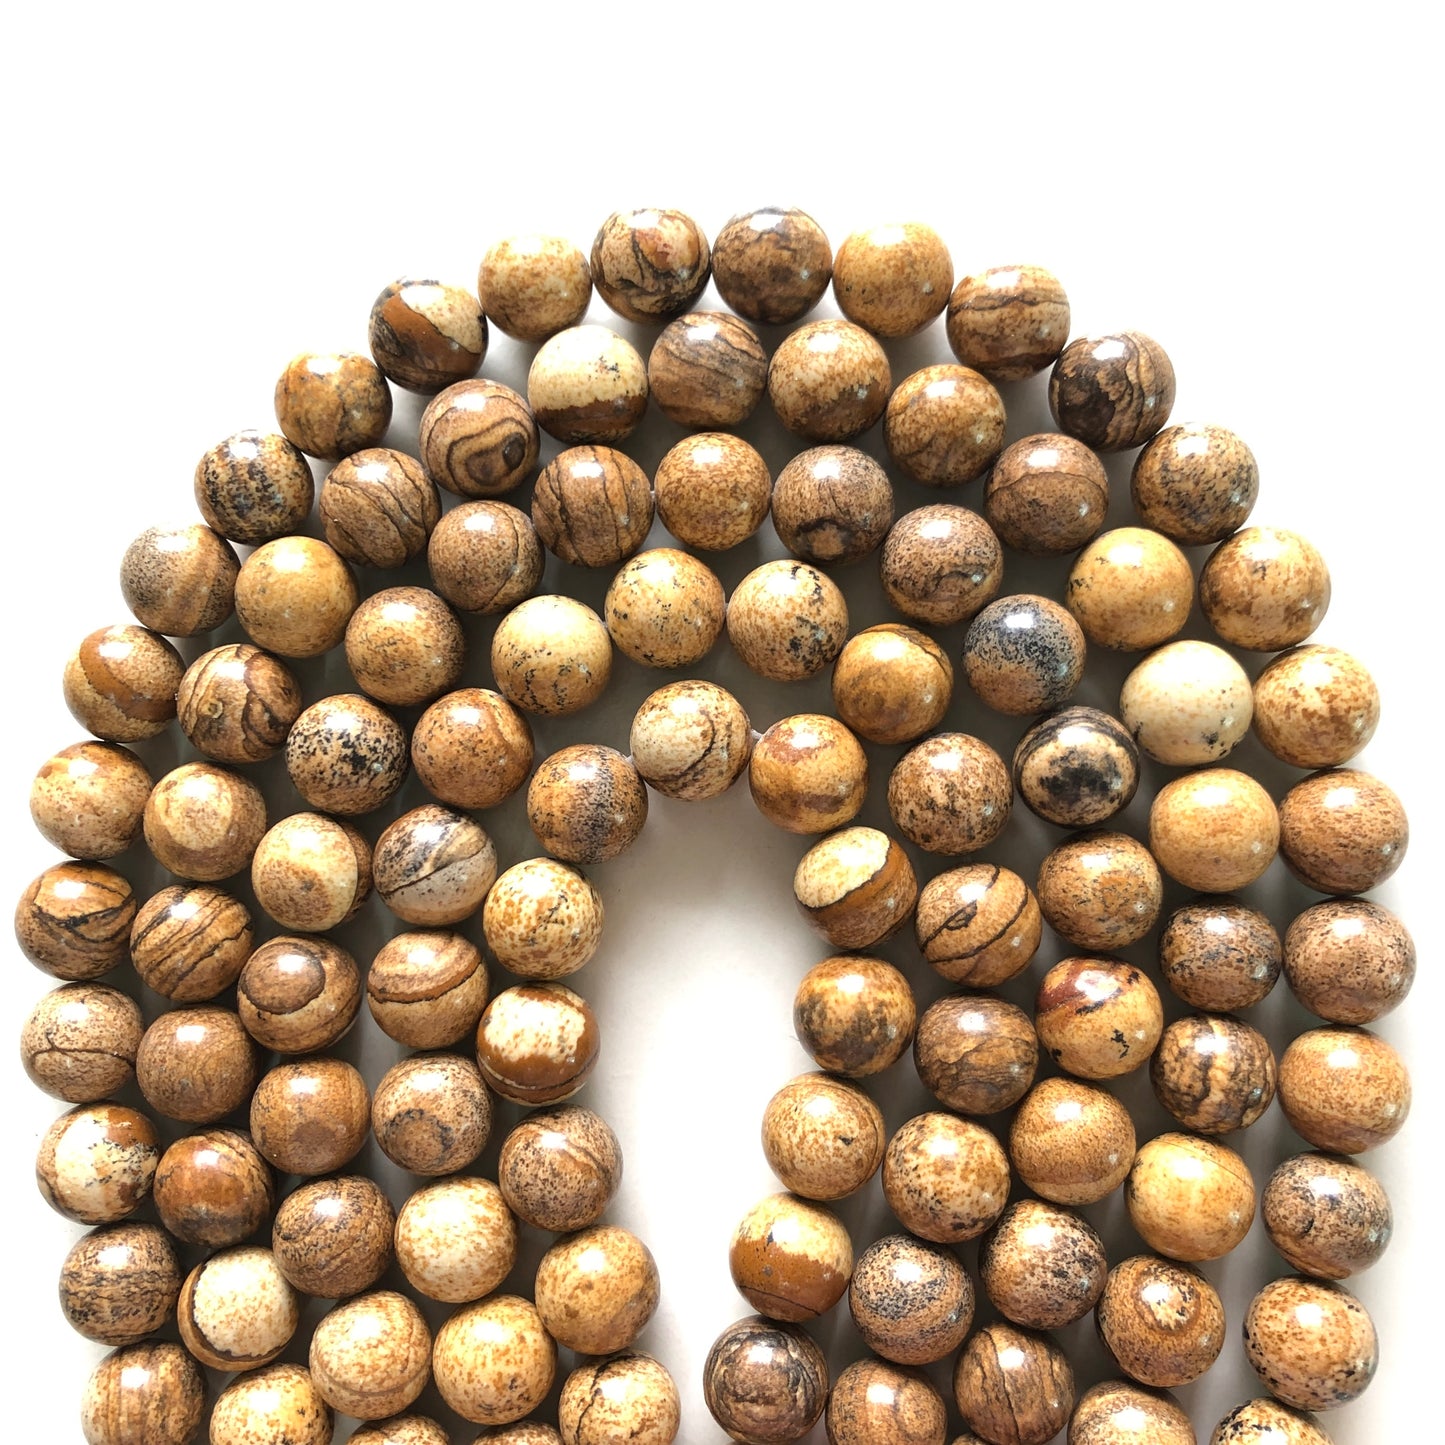 2 Strands/lot 10mm, 12mm Natural Picture Stone Round Beads 10mm Stone Beads 12mm Stone Beads New Beads Arrivals Other Stone Beads Charms Beads Beyond